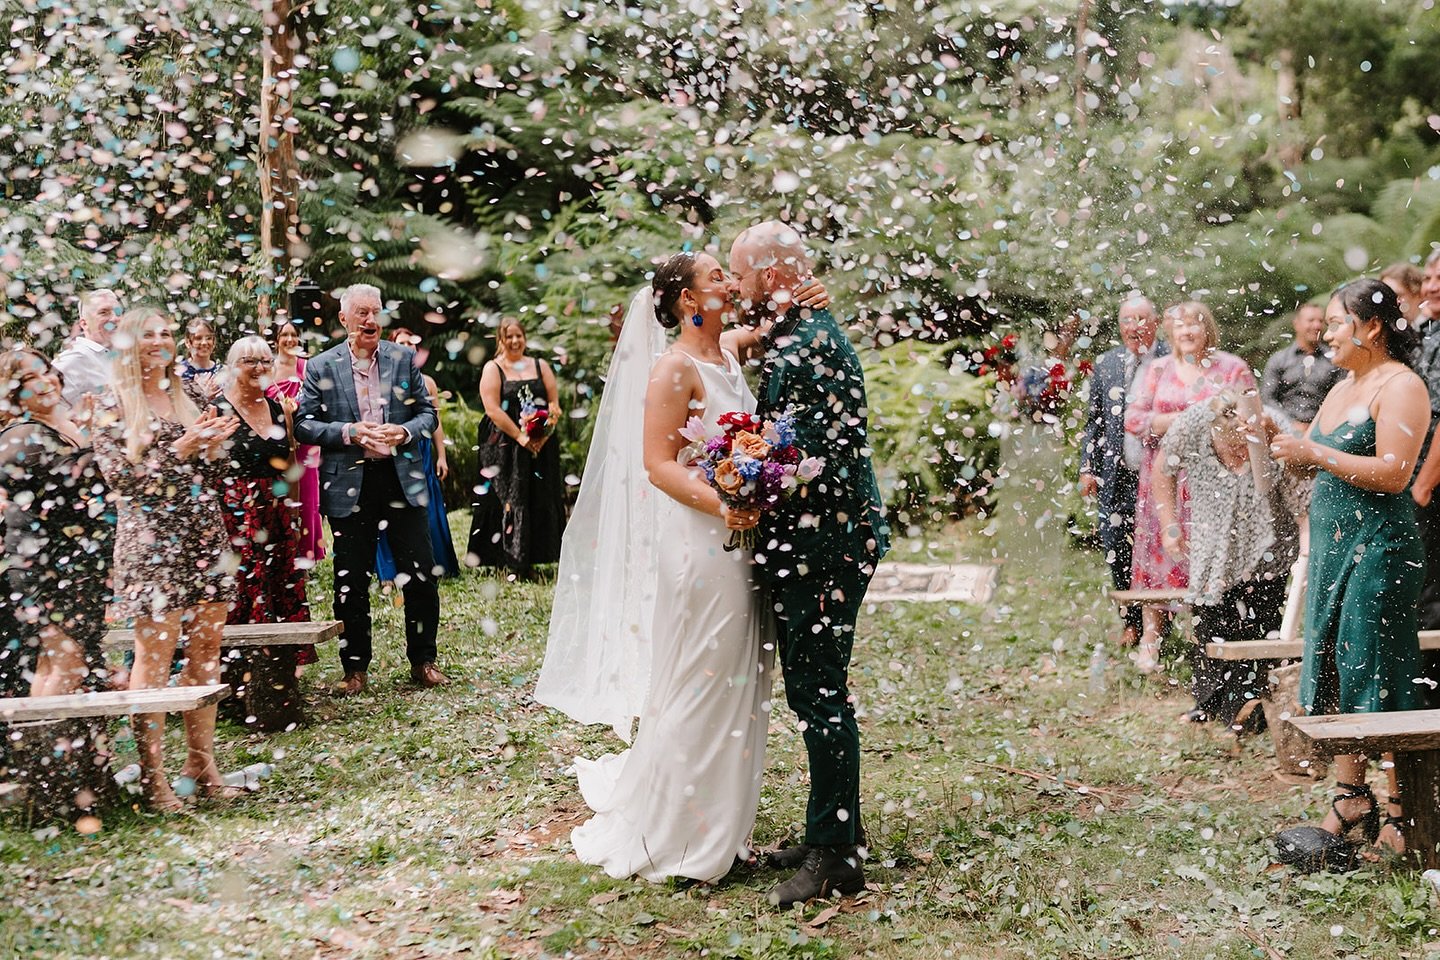 How much is too much confetti? Lol.

The answer is never too much! As long as it is an eco friendly confetti, which this is. 
.
Jordi and Jason nailing the just married aisle walk amidst what can only be described as a confetti STORM. 
.
📷: @heybabe